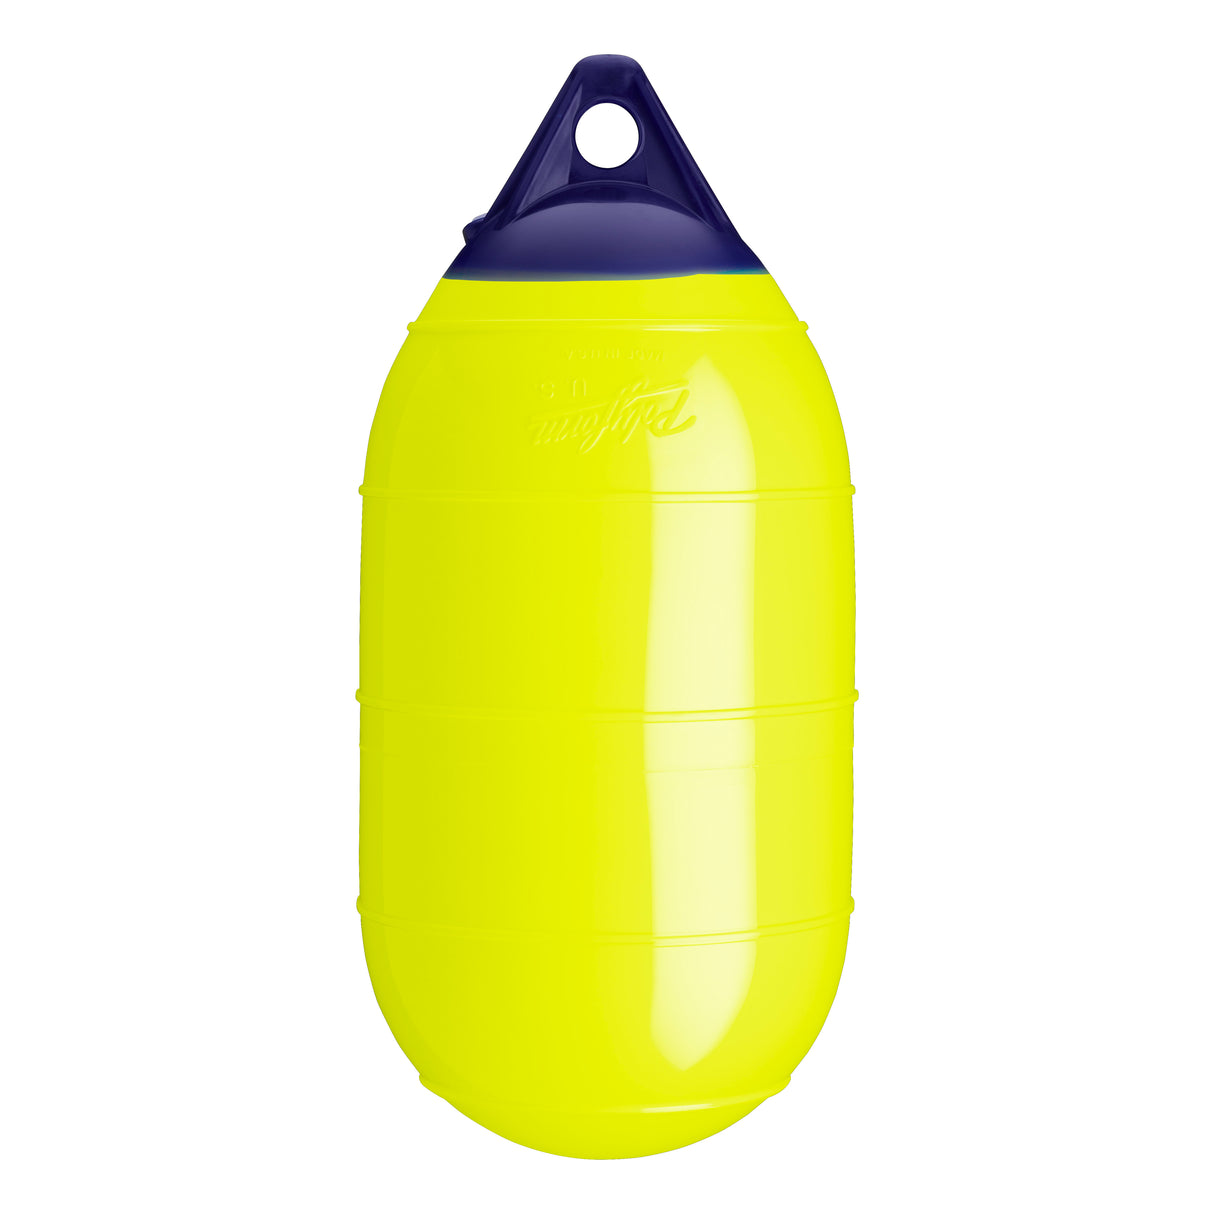 Saturn Yellow inflatable low drag buoy, Polyform LD-1 